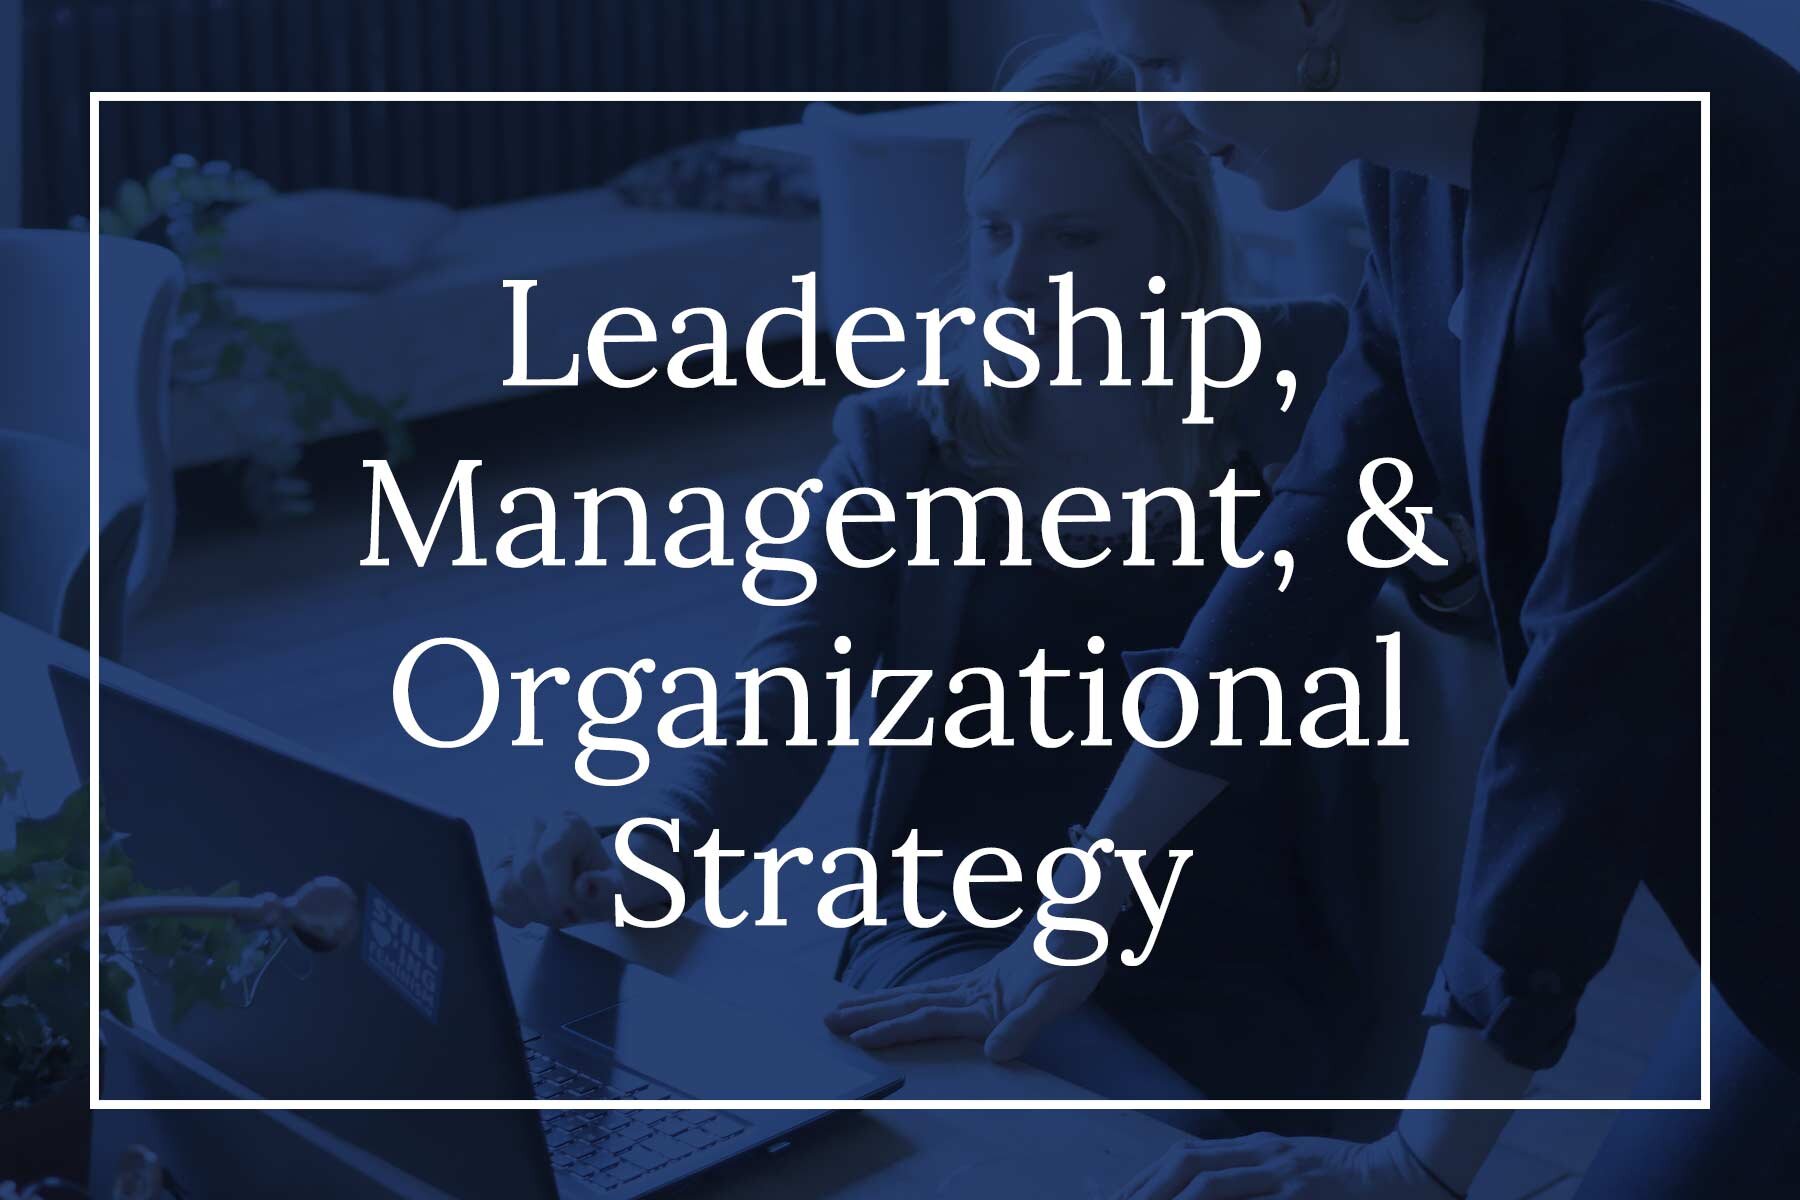 Leadership, Management, and Organizational Strategy